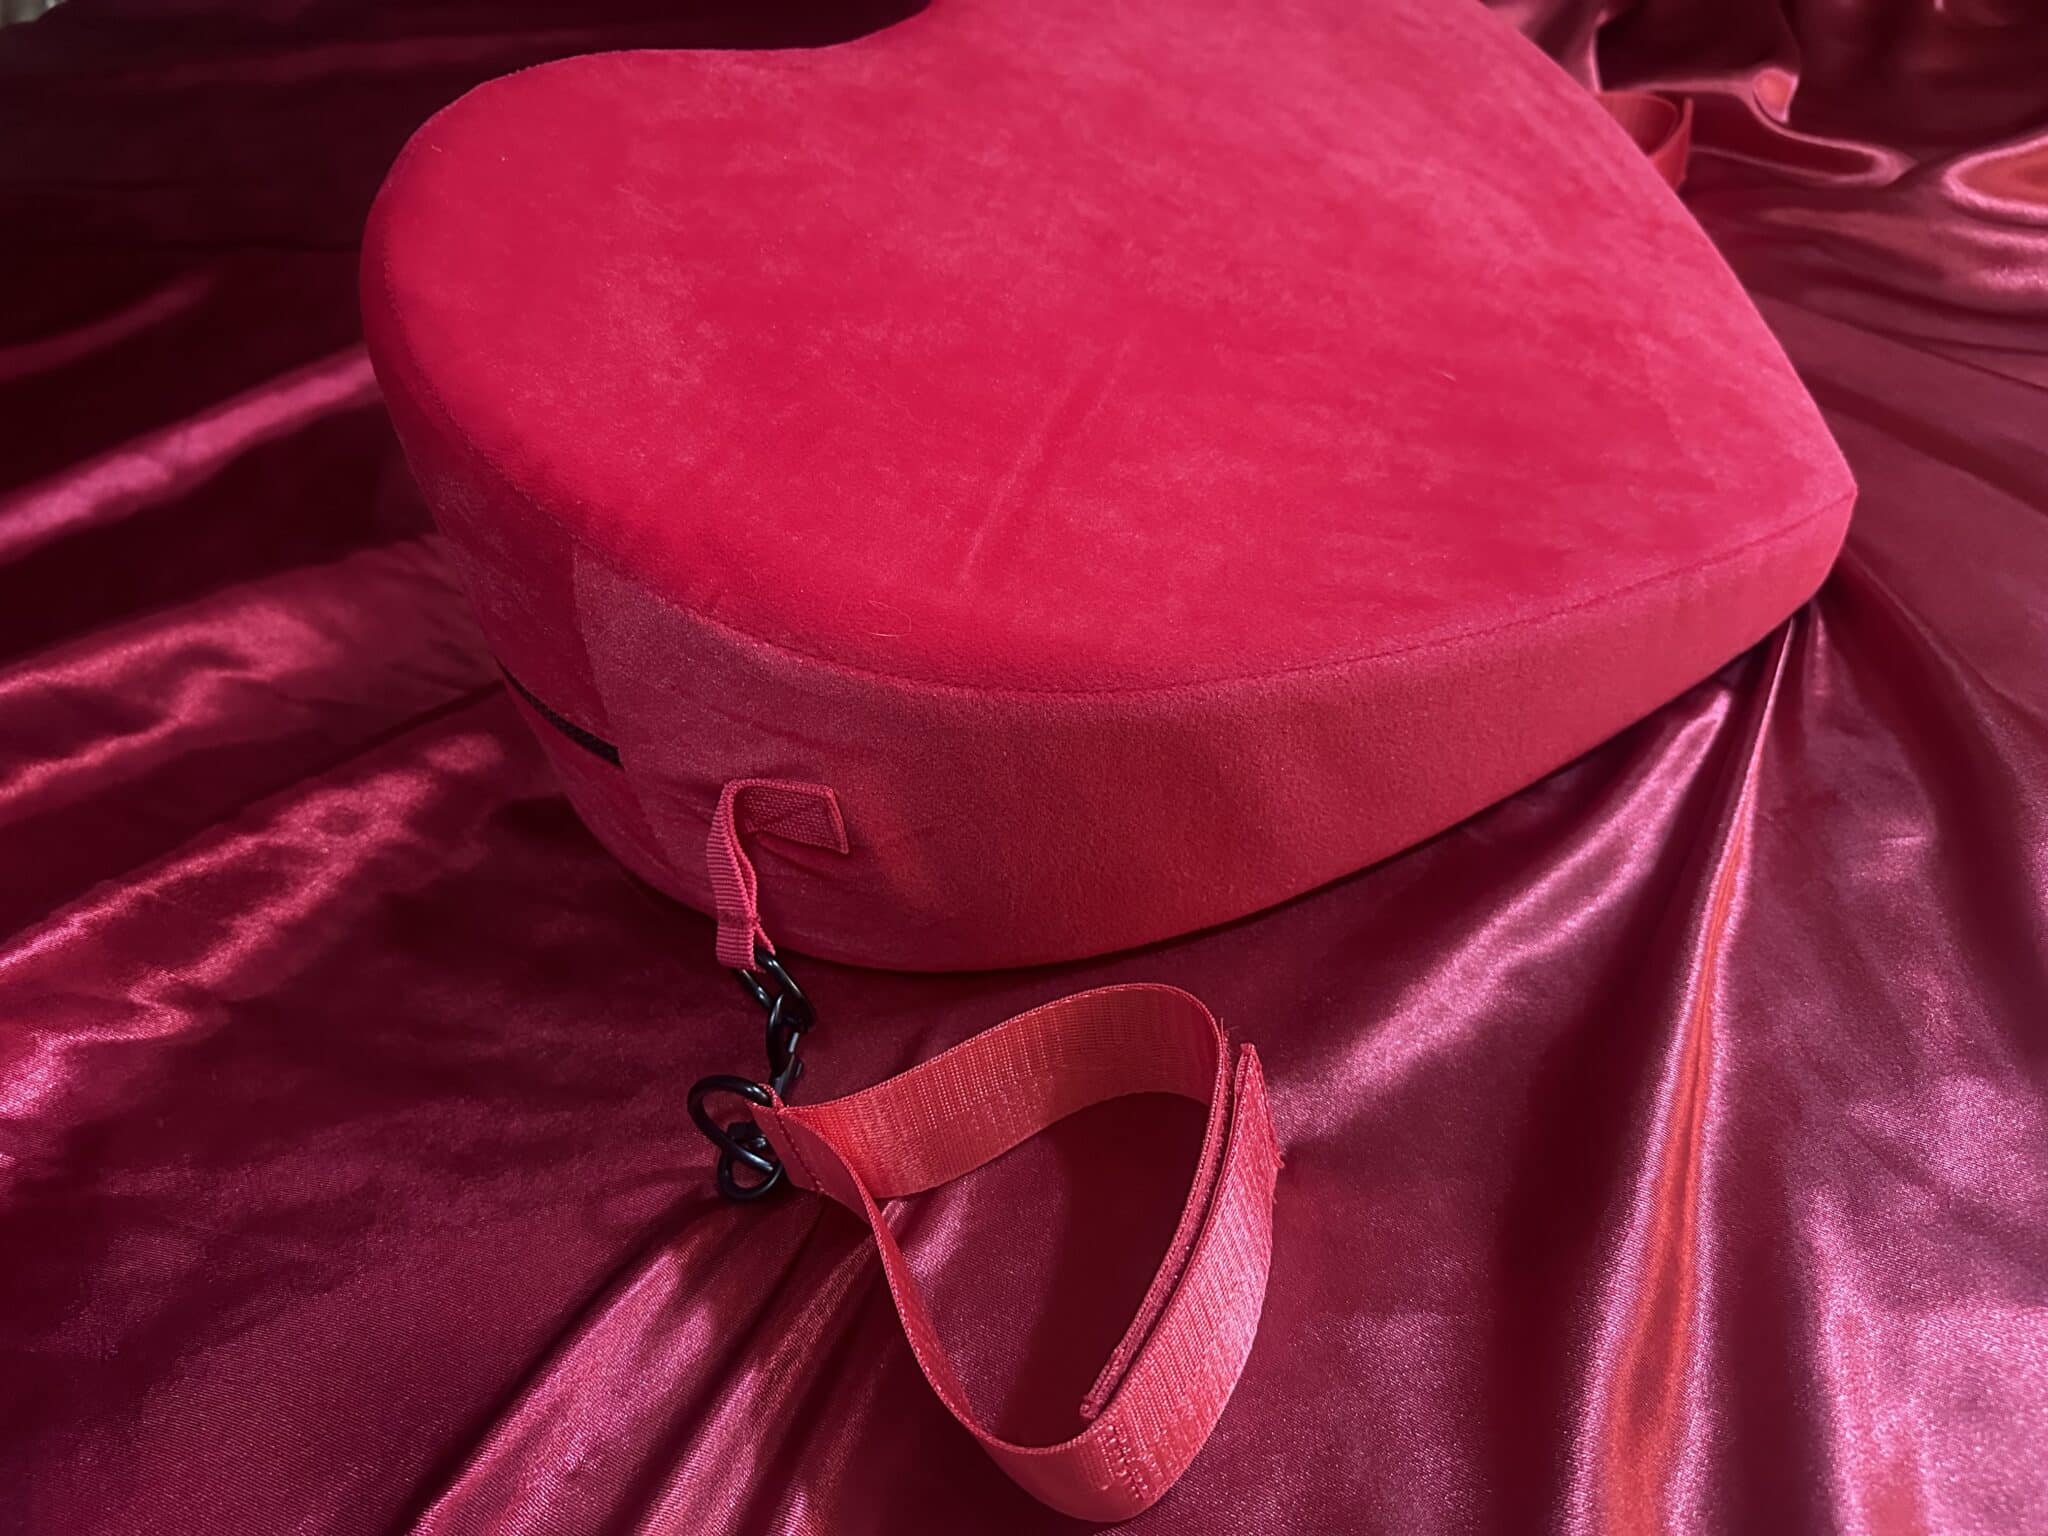 Whipsmart Love Cushion with Restraints. Slide 4